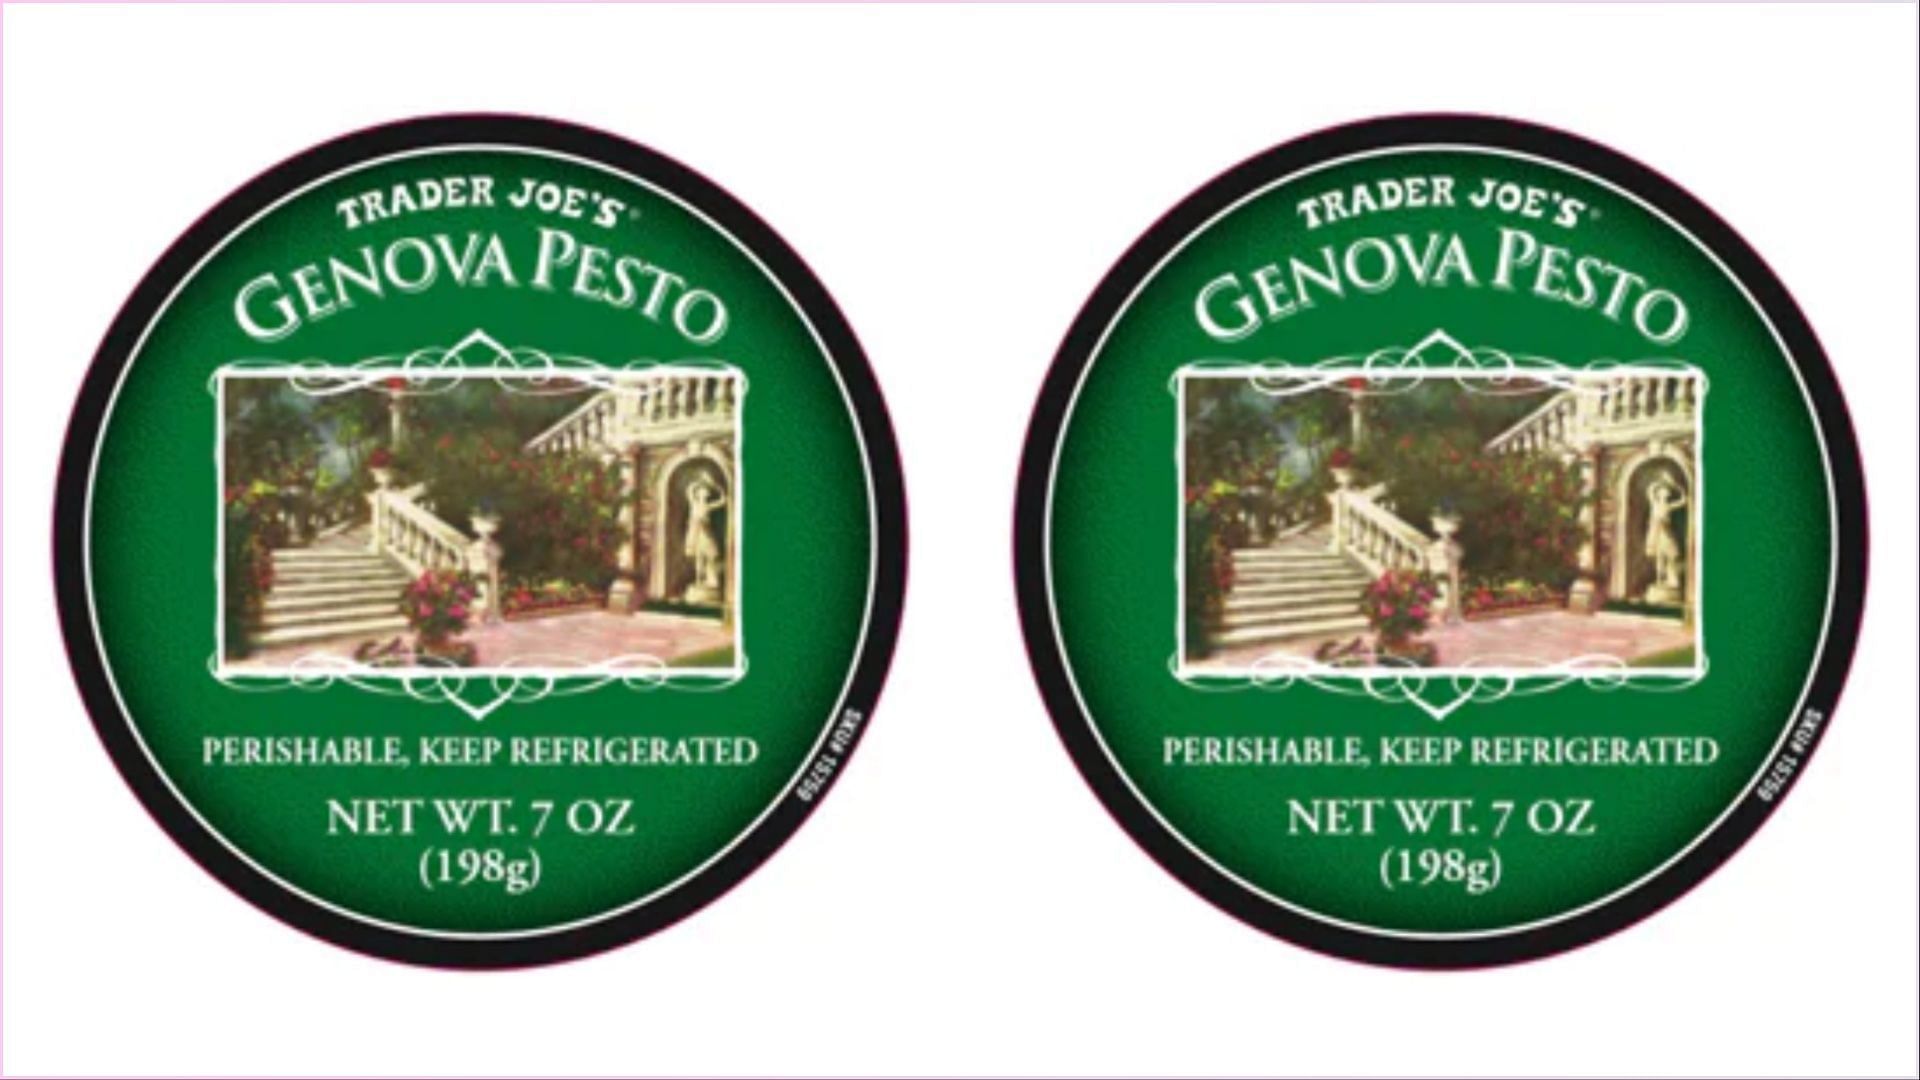 The recalled Trader Joe&rsquo;s Genova Pesto with SKU# 15759 is feared to contain undeclared milk and walnut allergens (Image via FDA)